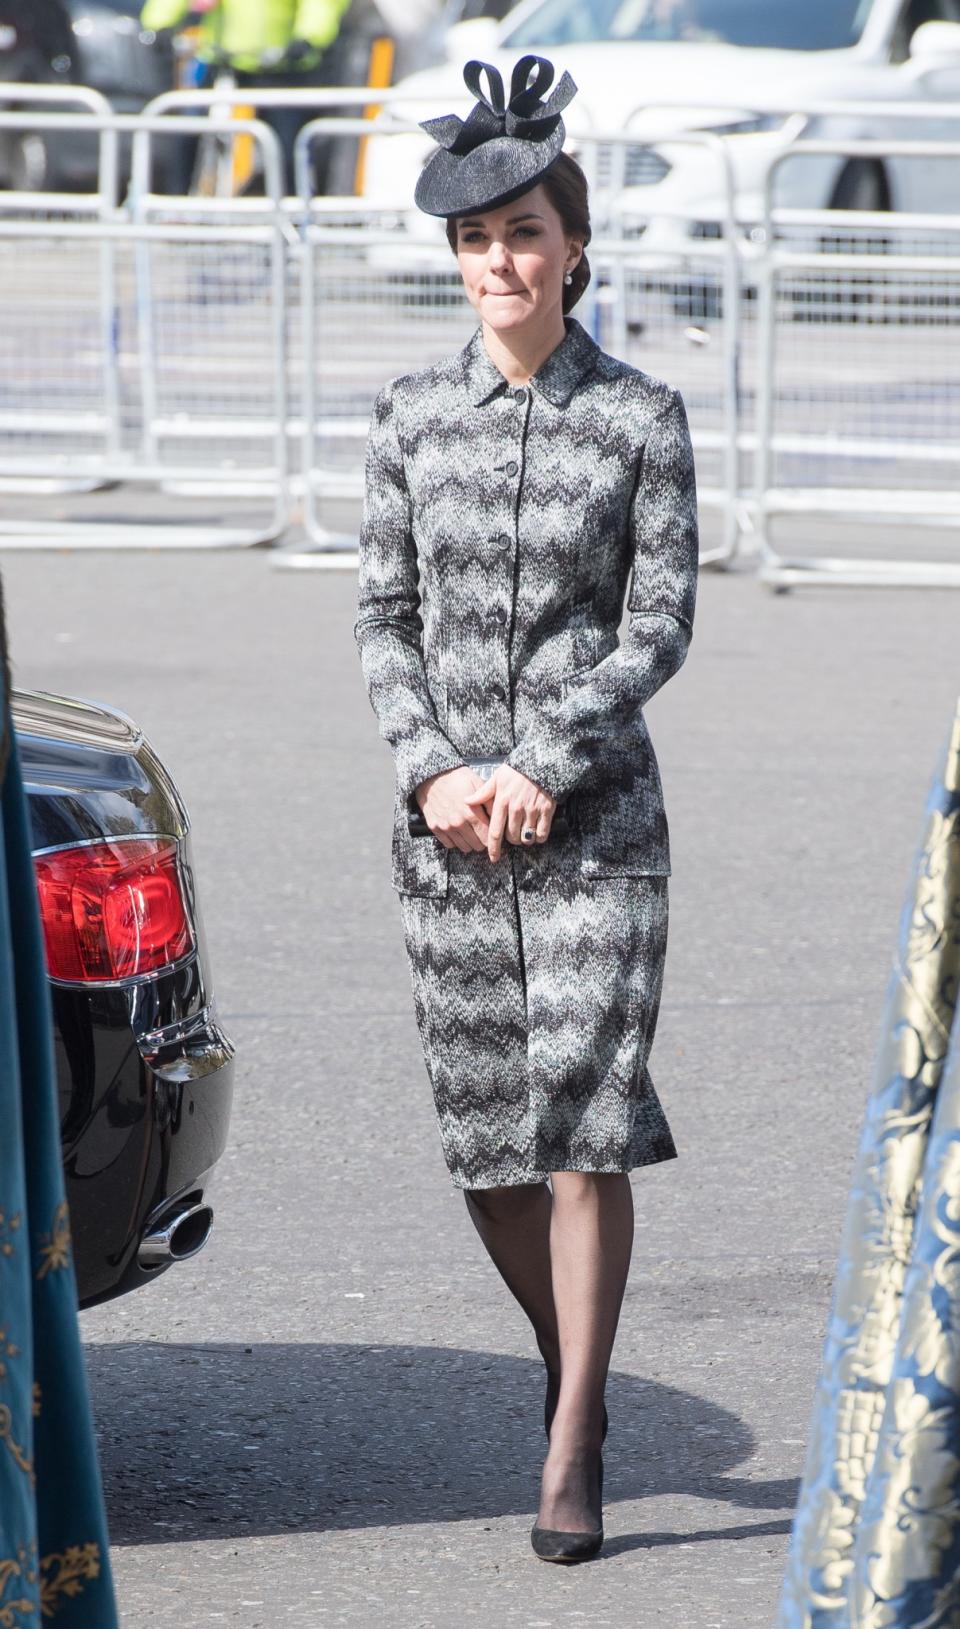 <p>The Duchess chose a suitably sombre look for a memorial service remembering the victims of the Westminster attack. She wore a zig-zag printed coat by Missoni (costing £2900) with a bow-topped black hat. A black clutch and heeled pumps added to the dark ensemble.<br><i>[Photo: PA]</i> </p>